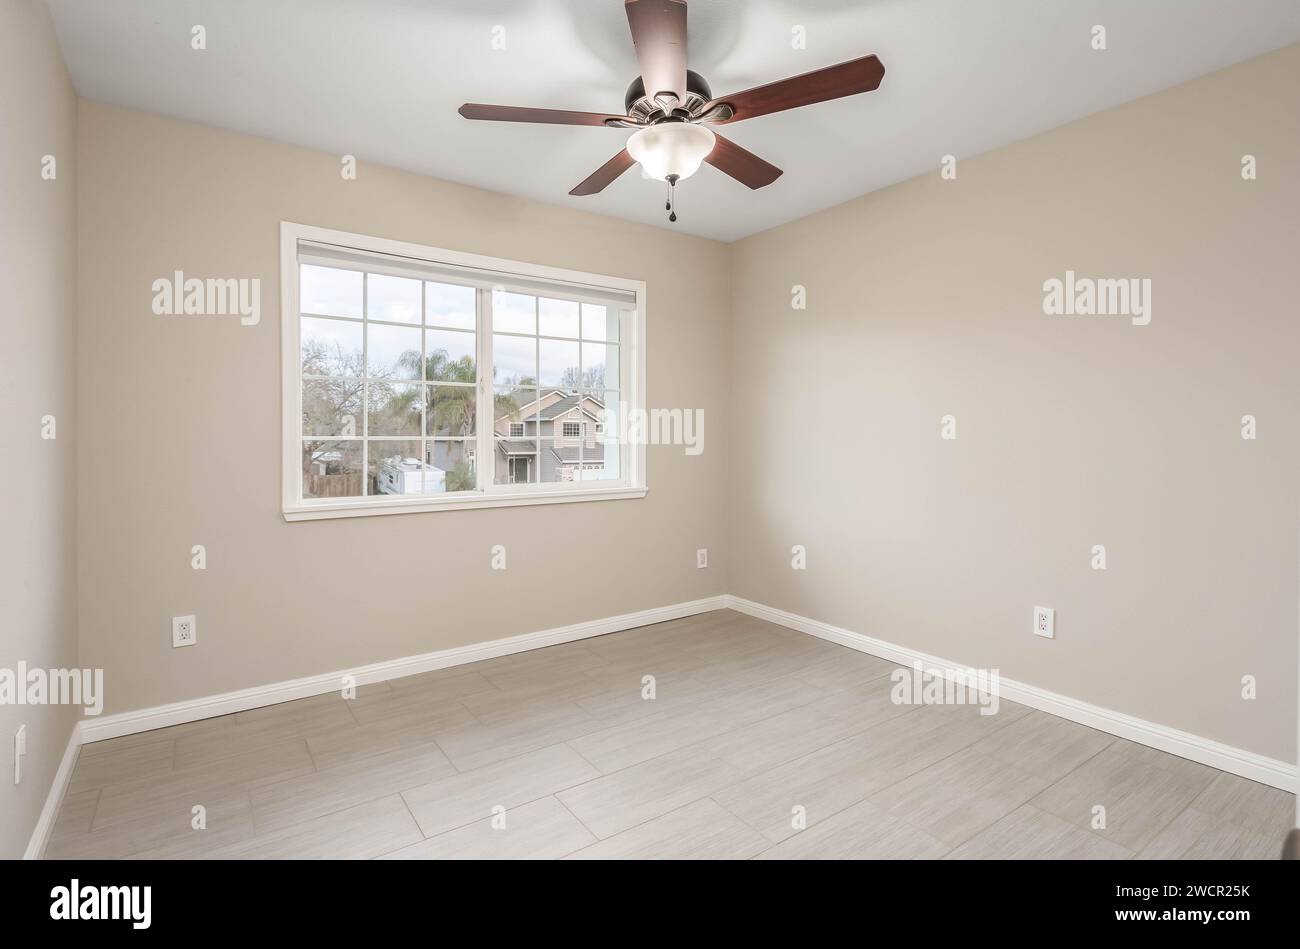 Empty Real Estate bedroom with bright walls, ceiling fan and windows. Great for virtual staging and real estate content Stock Photo